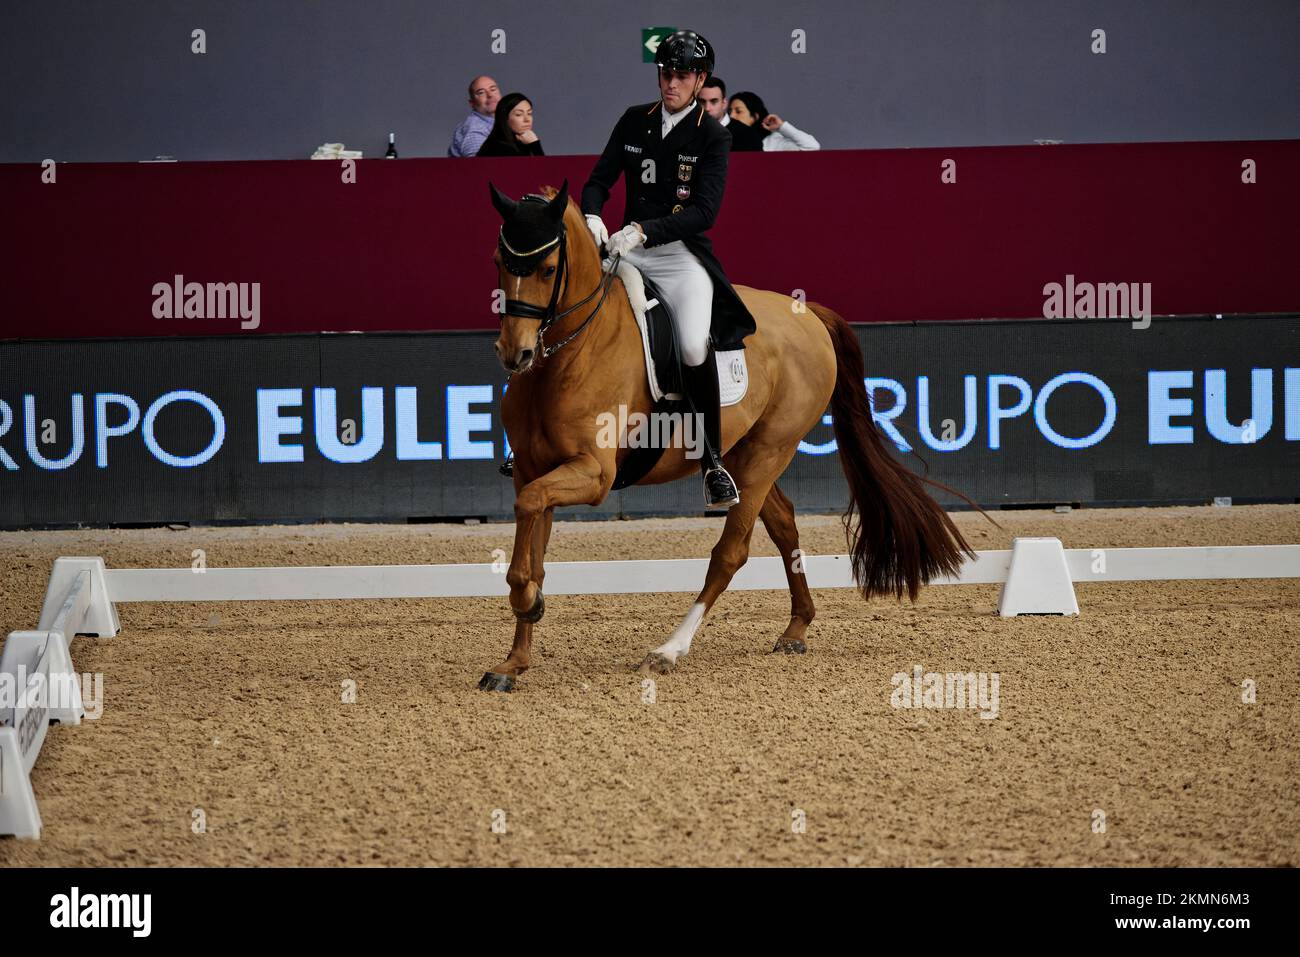 IFEMA, Madrid, Spain. 26th Nov, 2022. Madrid Horse Week 2022, FEI Dressage World Cup, Eulen Grand Prix Freestyle. Frederic Wandres in the picture. Madrid, Spain. Credit: EnriquePSans/Alamy Live News Stock Photo